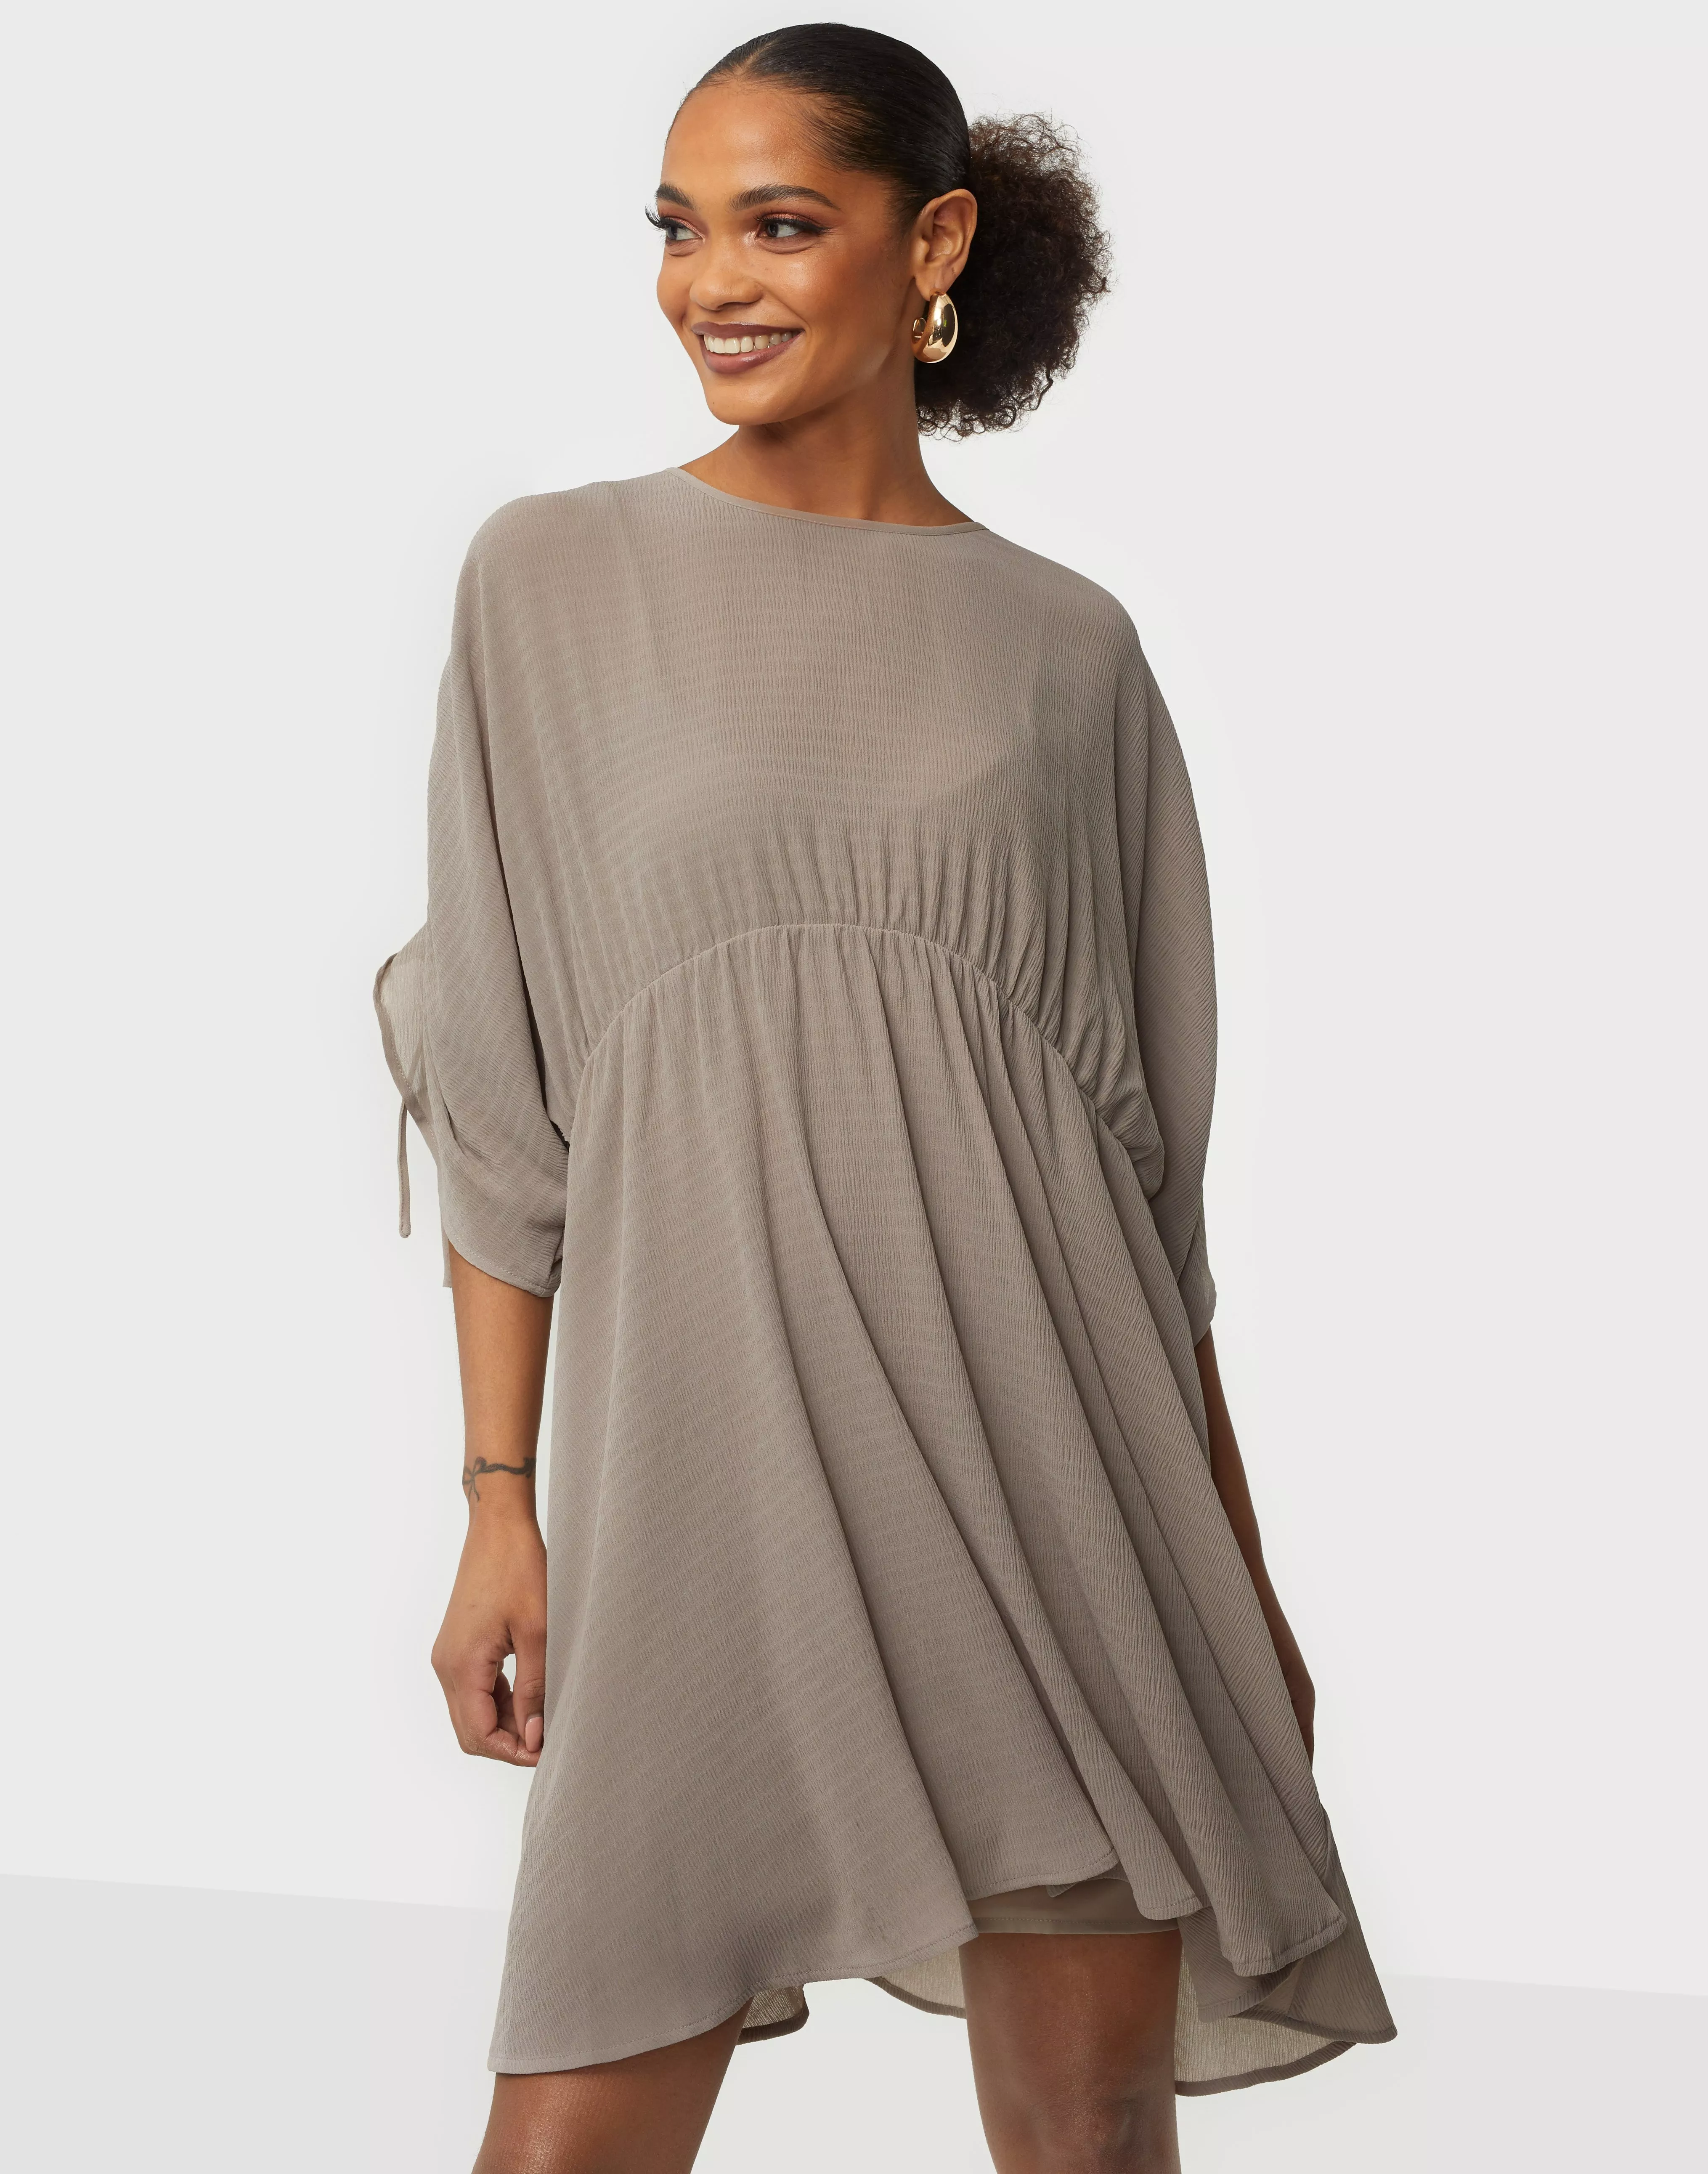 Buy Nelly Loose Dress - Beige | Nelly.com